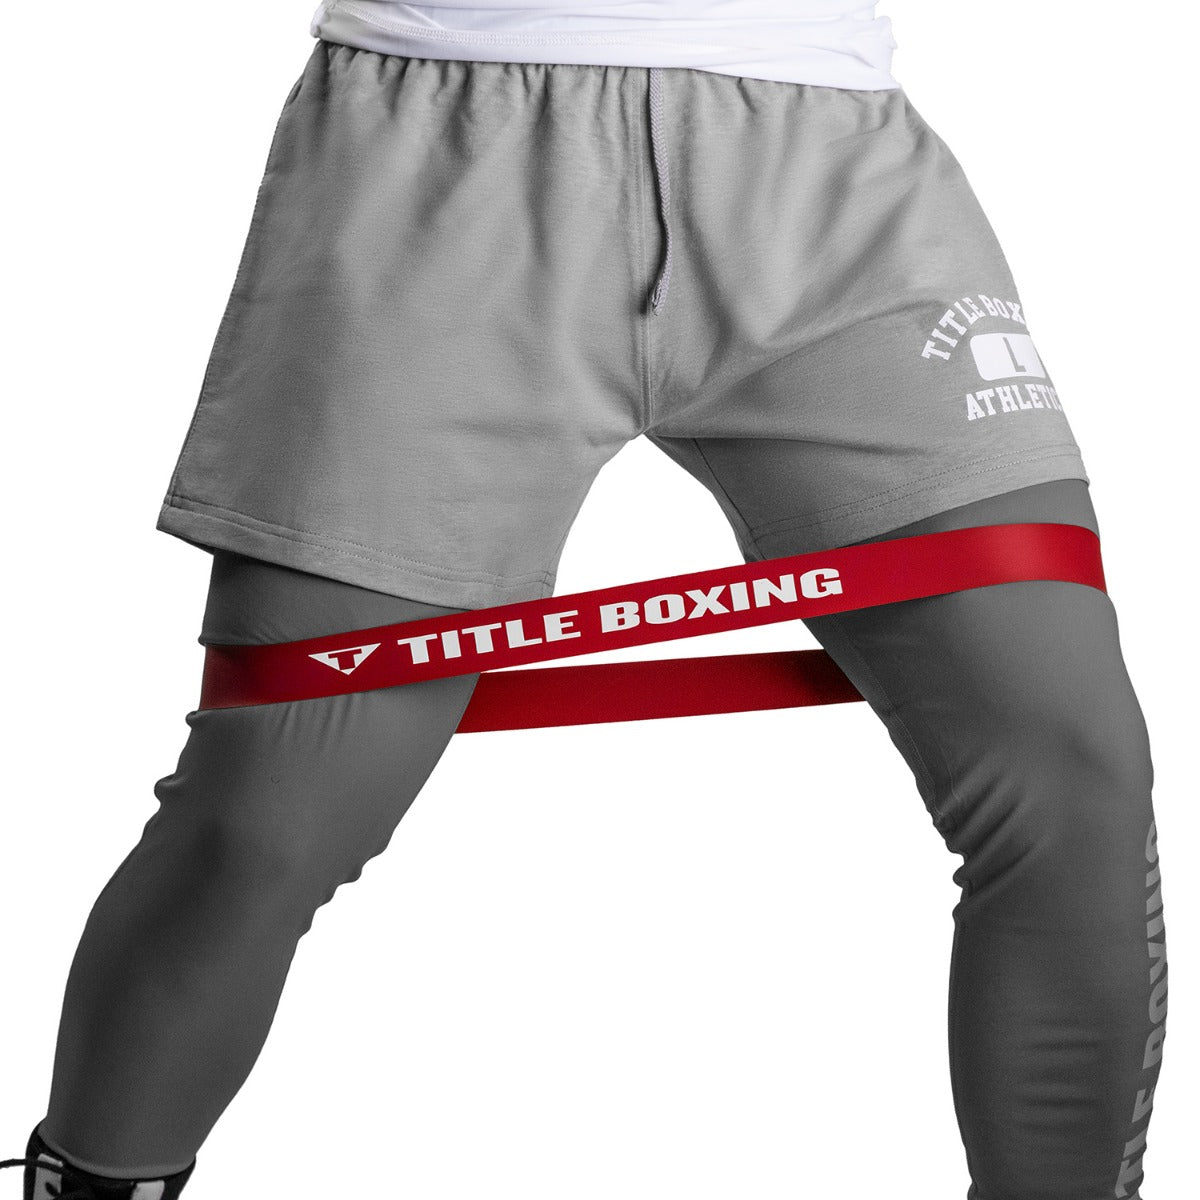 TITLE Boxing Power Stance Resistance Bands